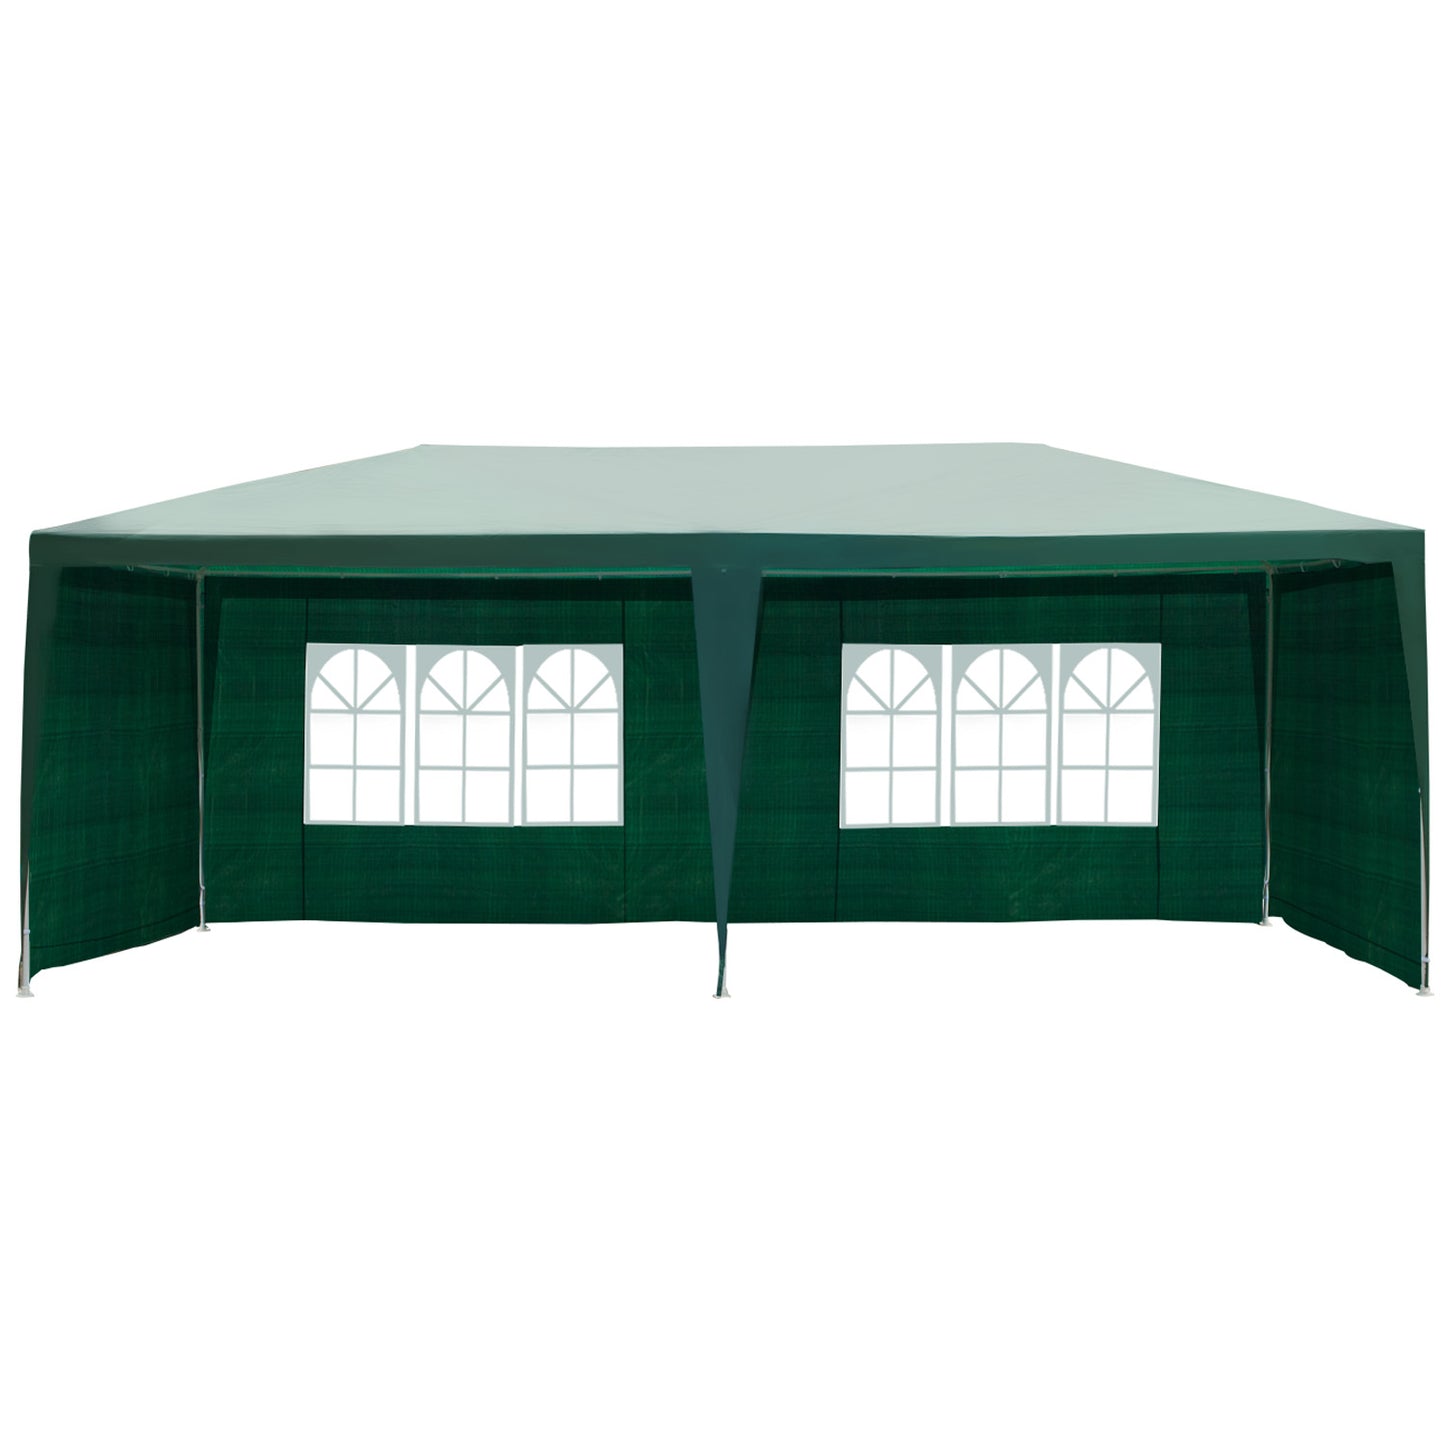 Outsunny Gazebo Canopy Camping/Party/Wedding Tent with PE Cloth 6x3 m-Green